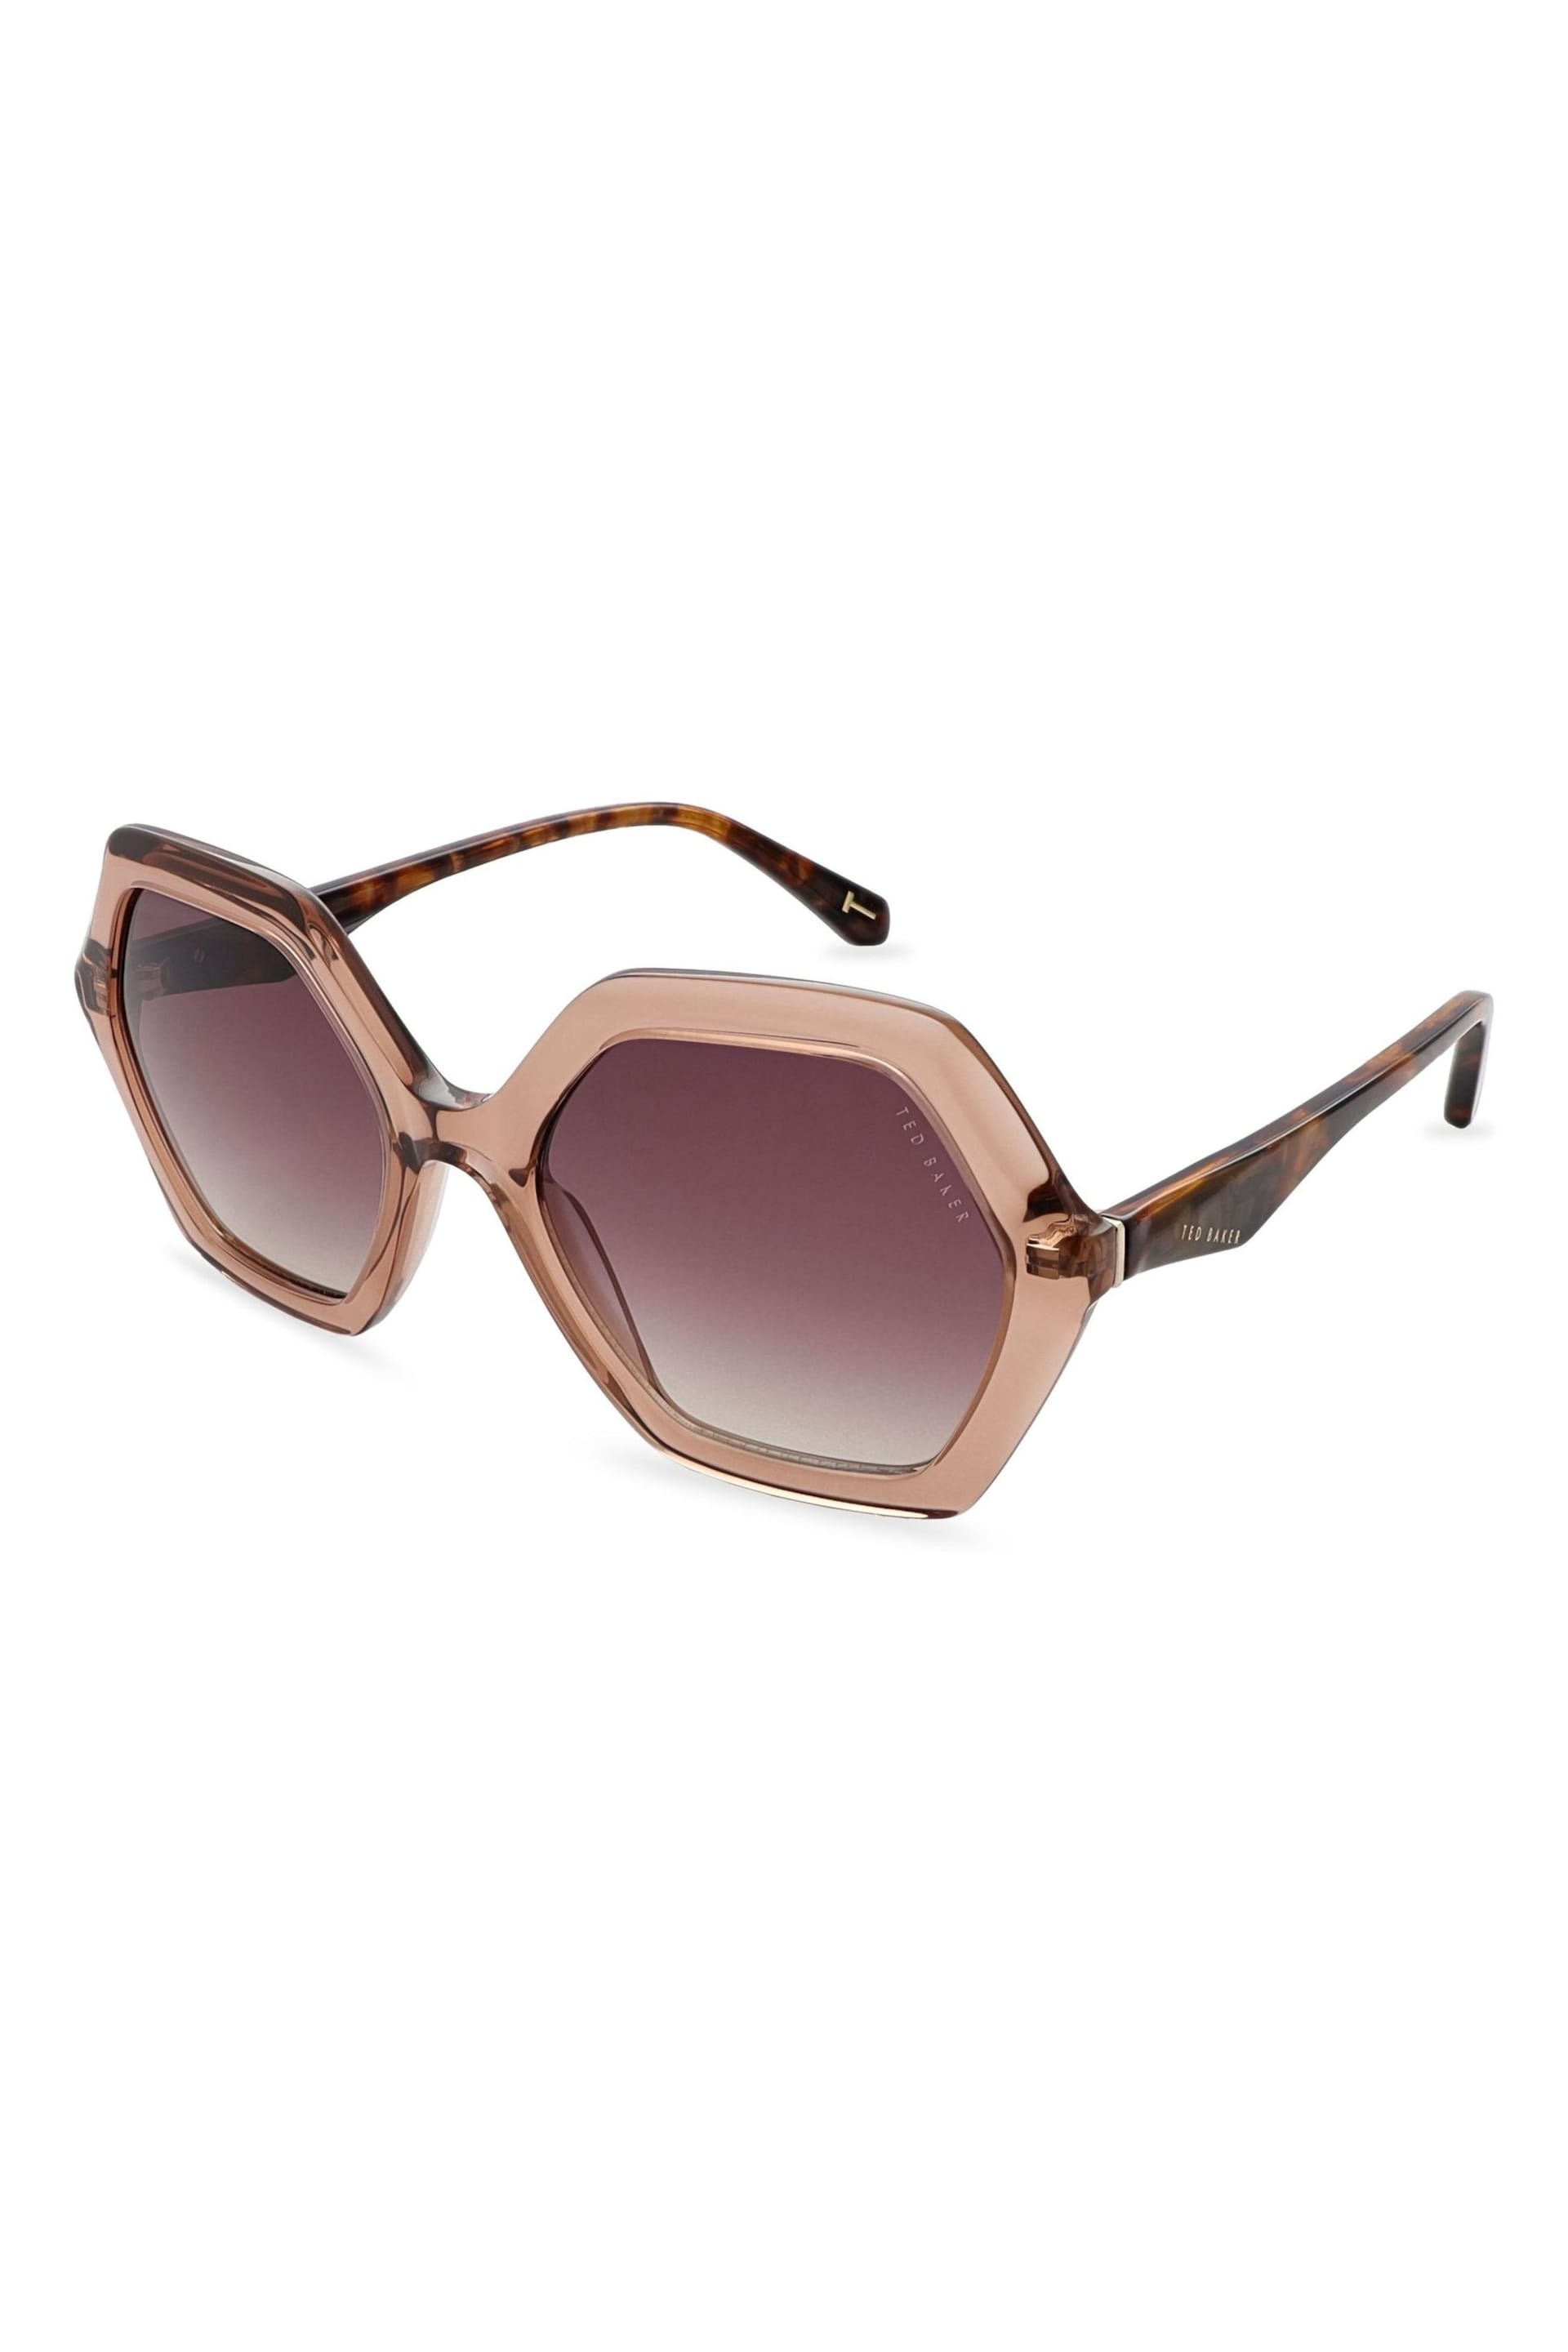 Ted Baker Brown Evie Sunglasses - Image 1 of 5